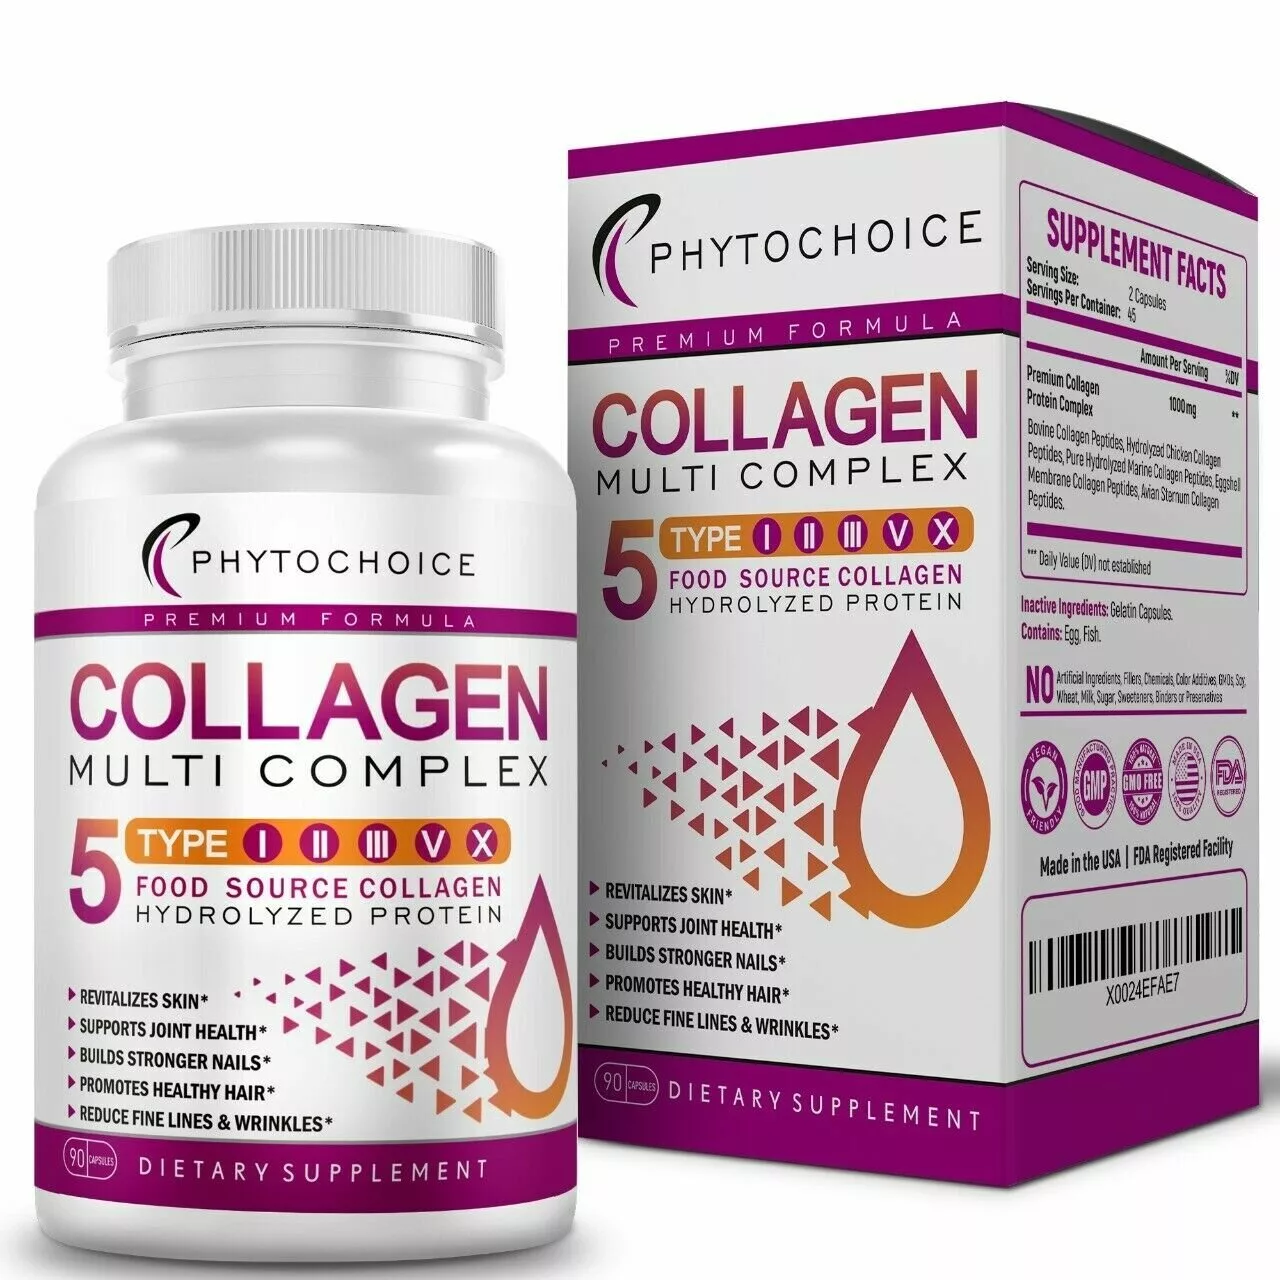 Коллаген вопросы. Phytochoice Collagen Multi Complex 90 капс. Multi Collagen Peptides- 90 Capsules-Type i,II,III,V,X Anti-Aging Collagen Pills. Phytochoice Multi Collagen Type i, II, III, V & X, 90 капс,. Коллаген phytochoice Collagen Multi Complex 90 капсул.